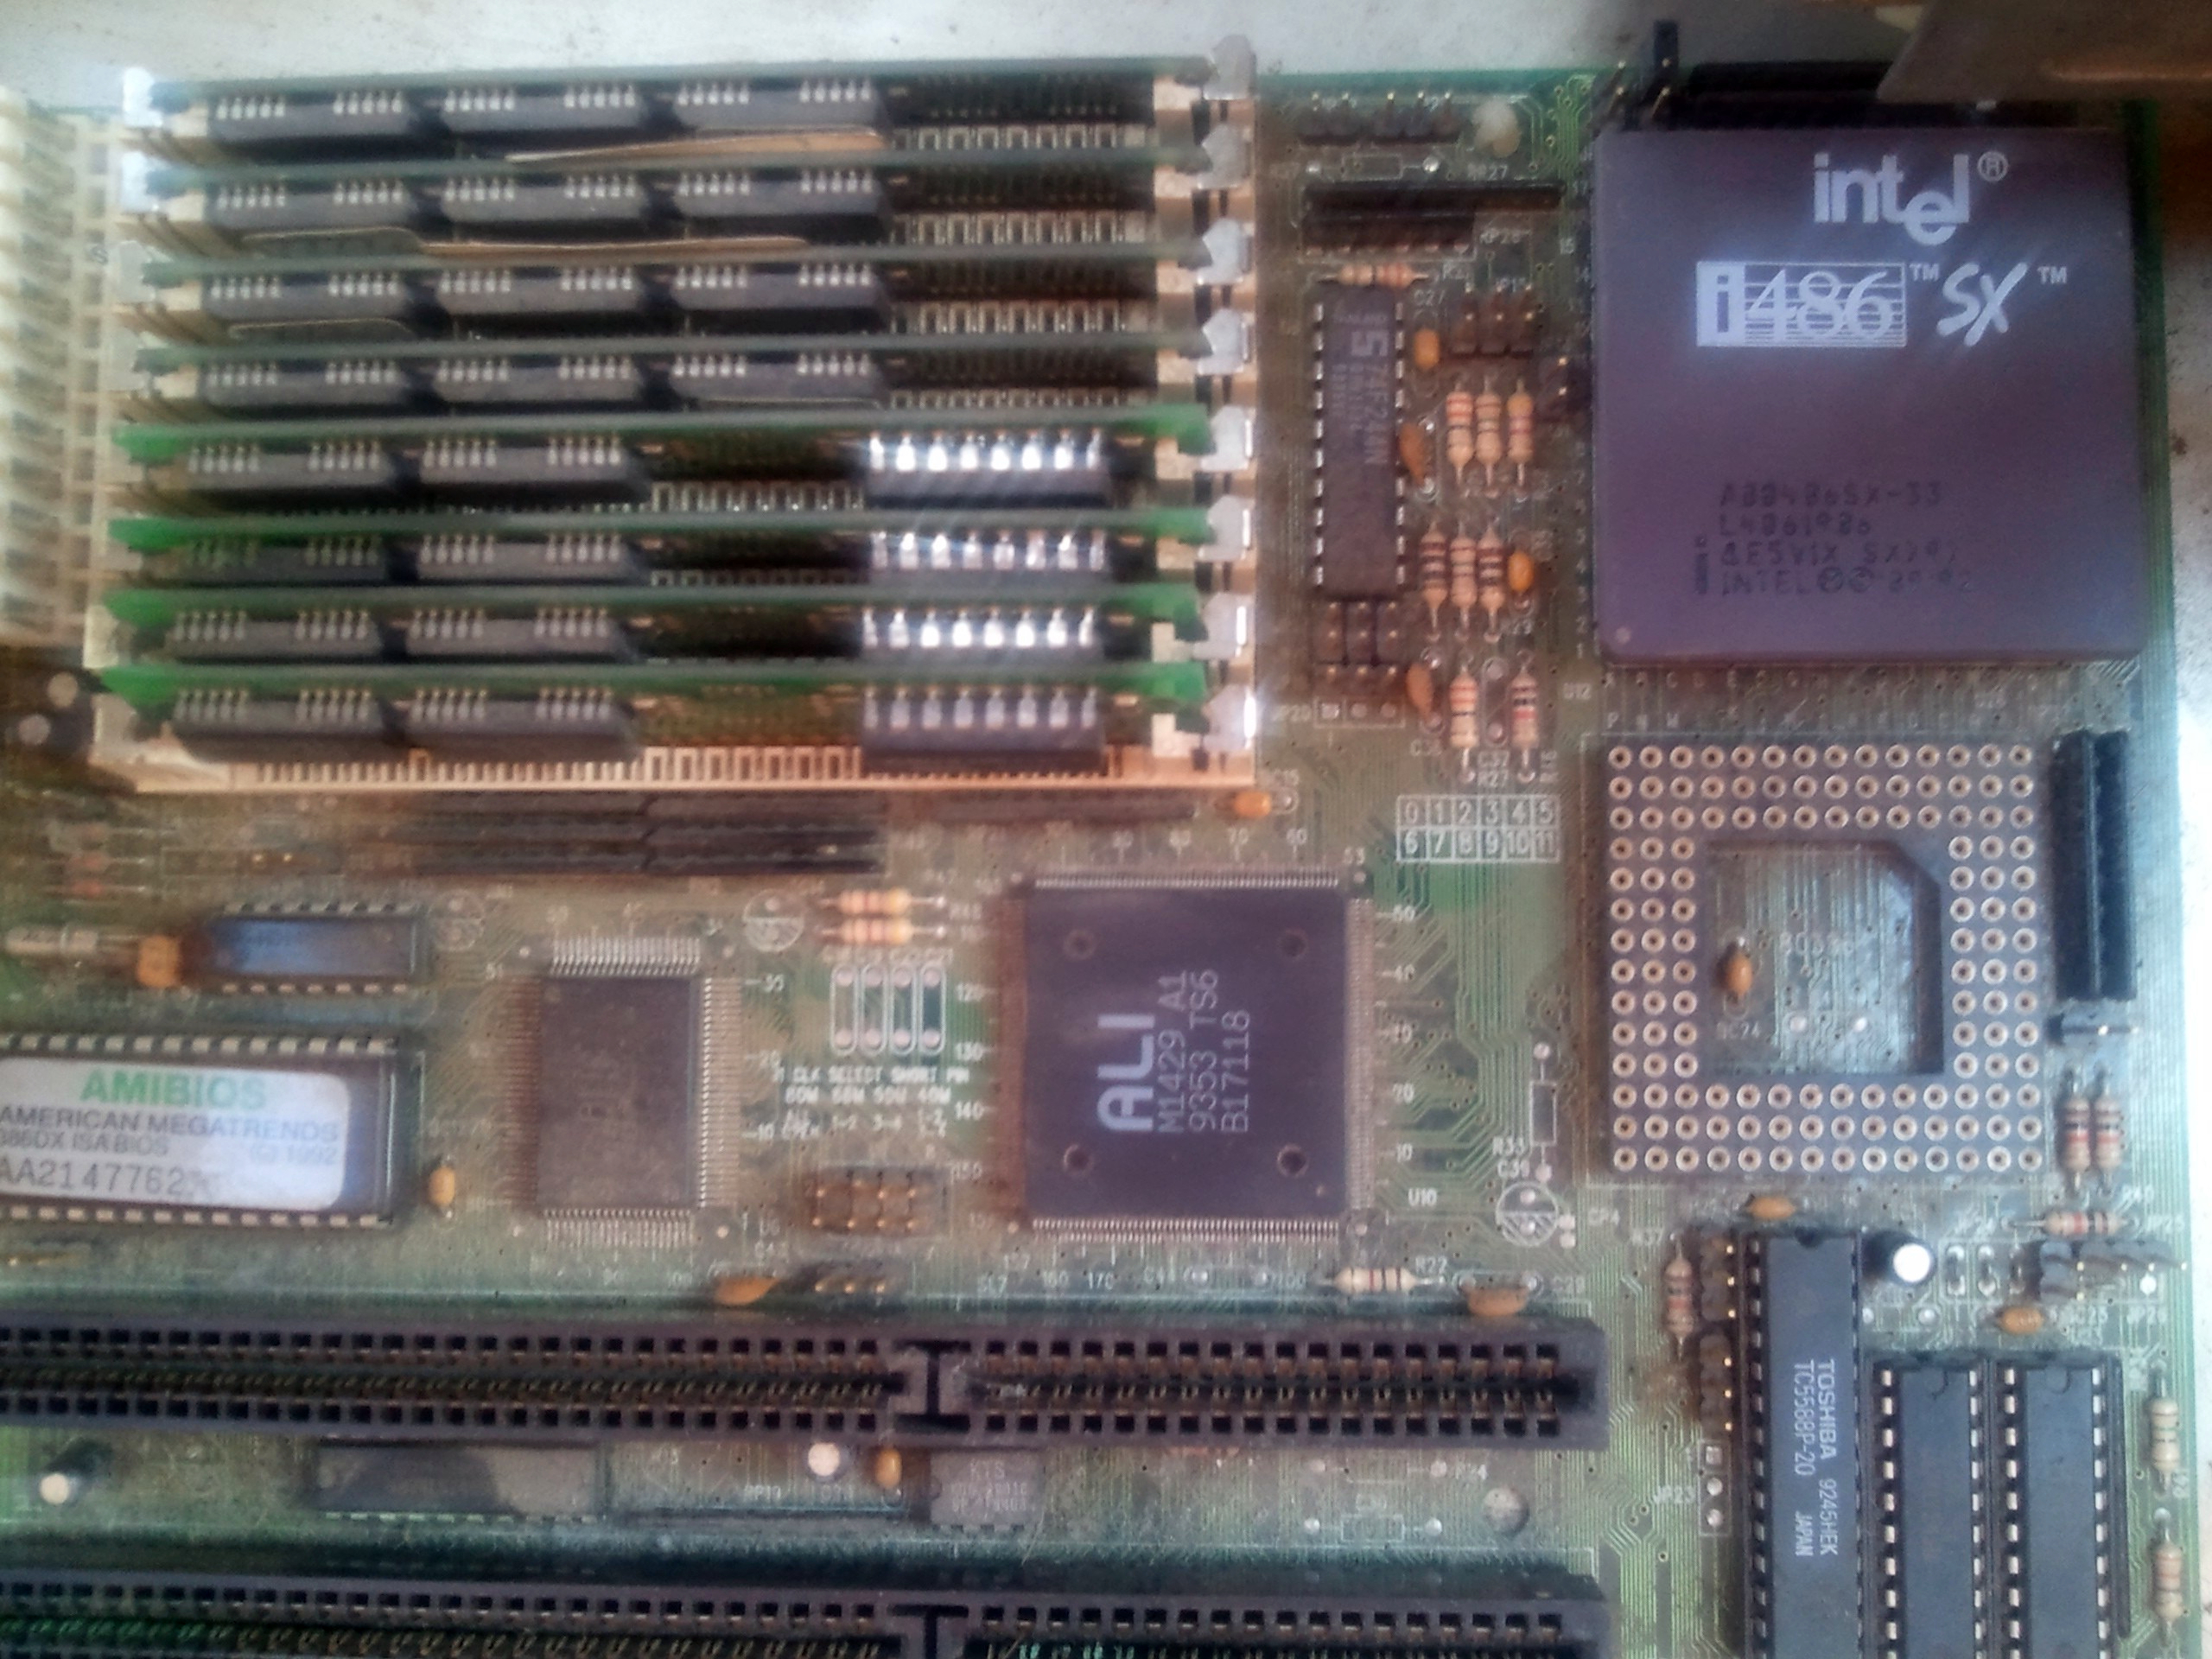 Here it is. In all it&rsquo;s dusty 33Mhz glory! I took this photo some 10 years ago when I&rsquo;d travelled home and found the vintage horizontal-style CPU box in a pile of junk.